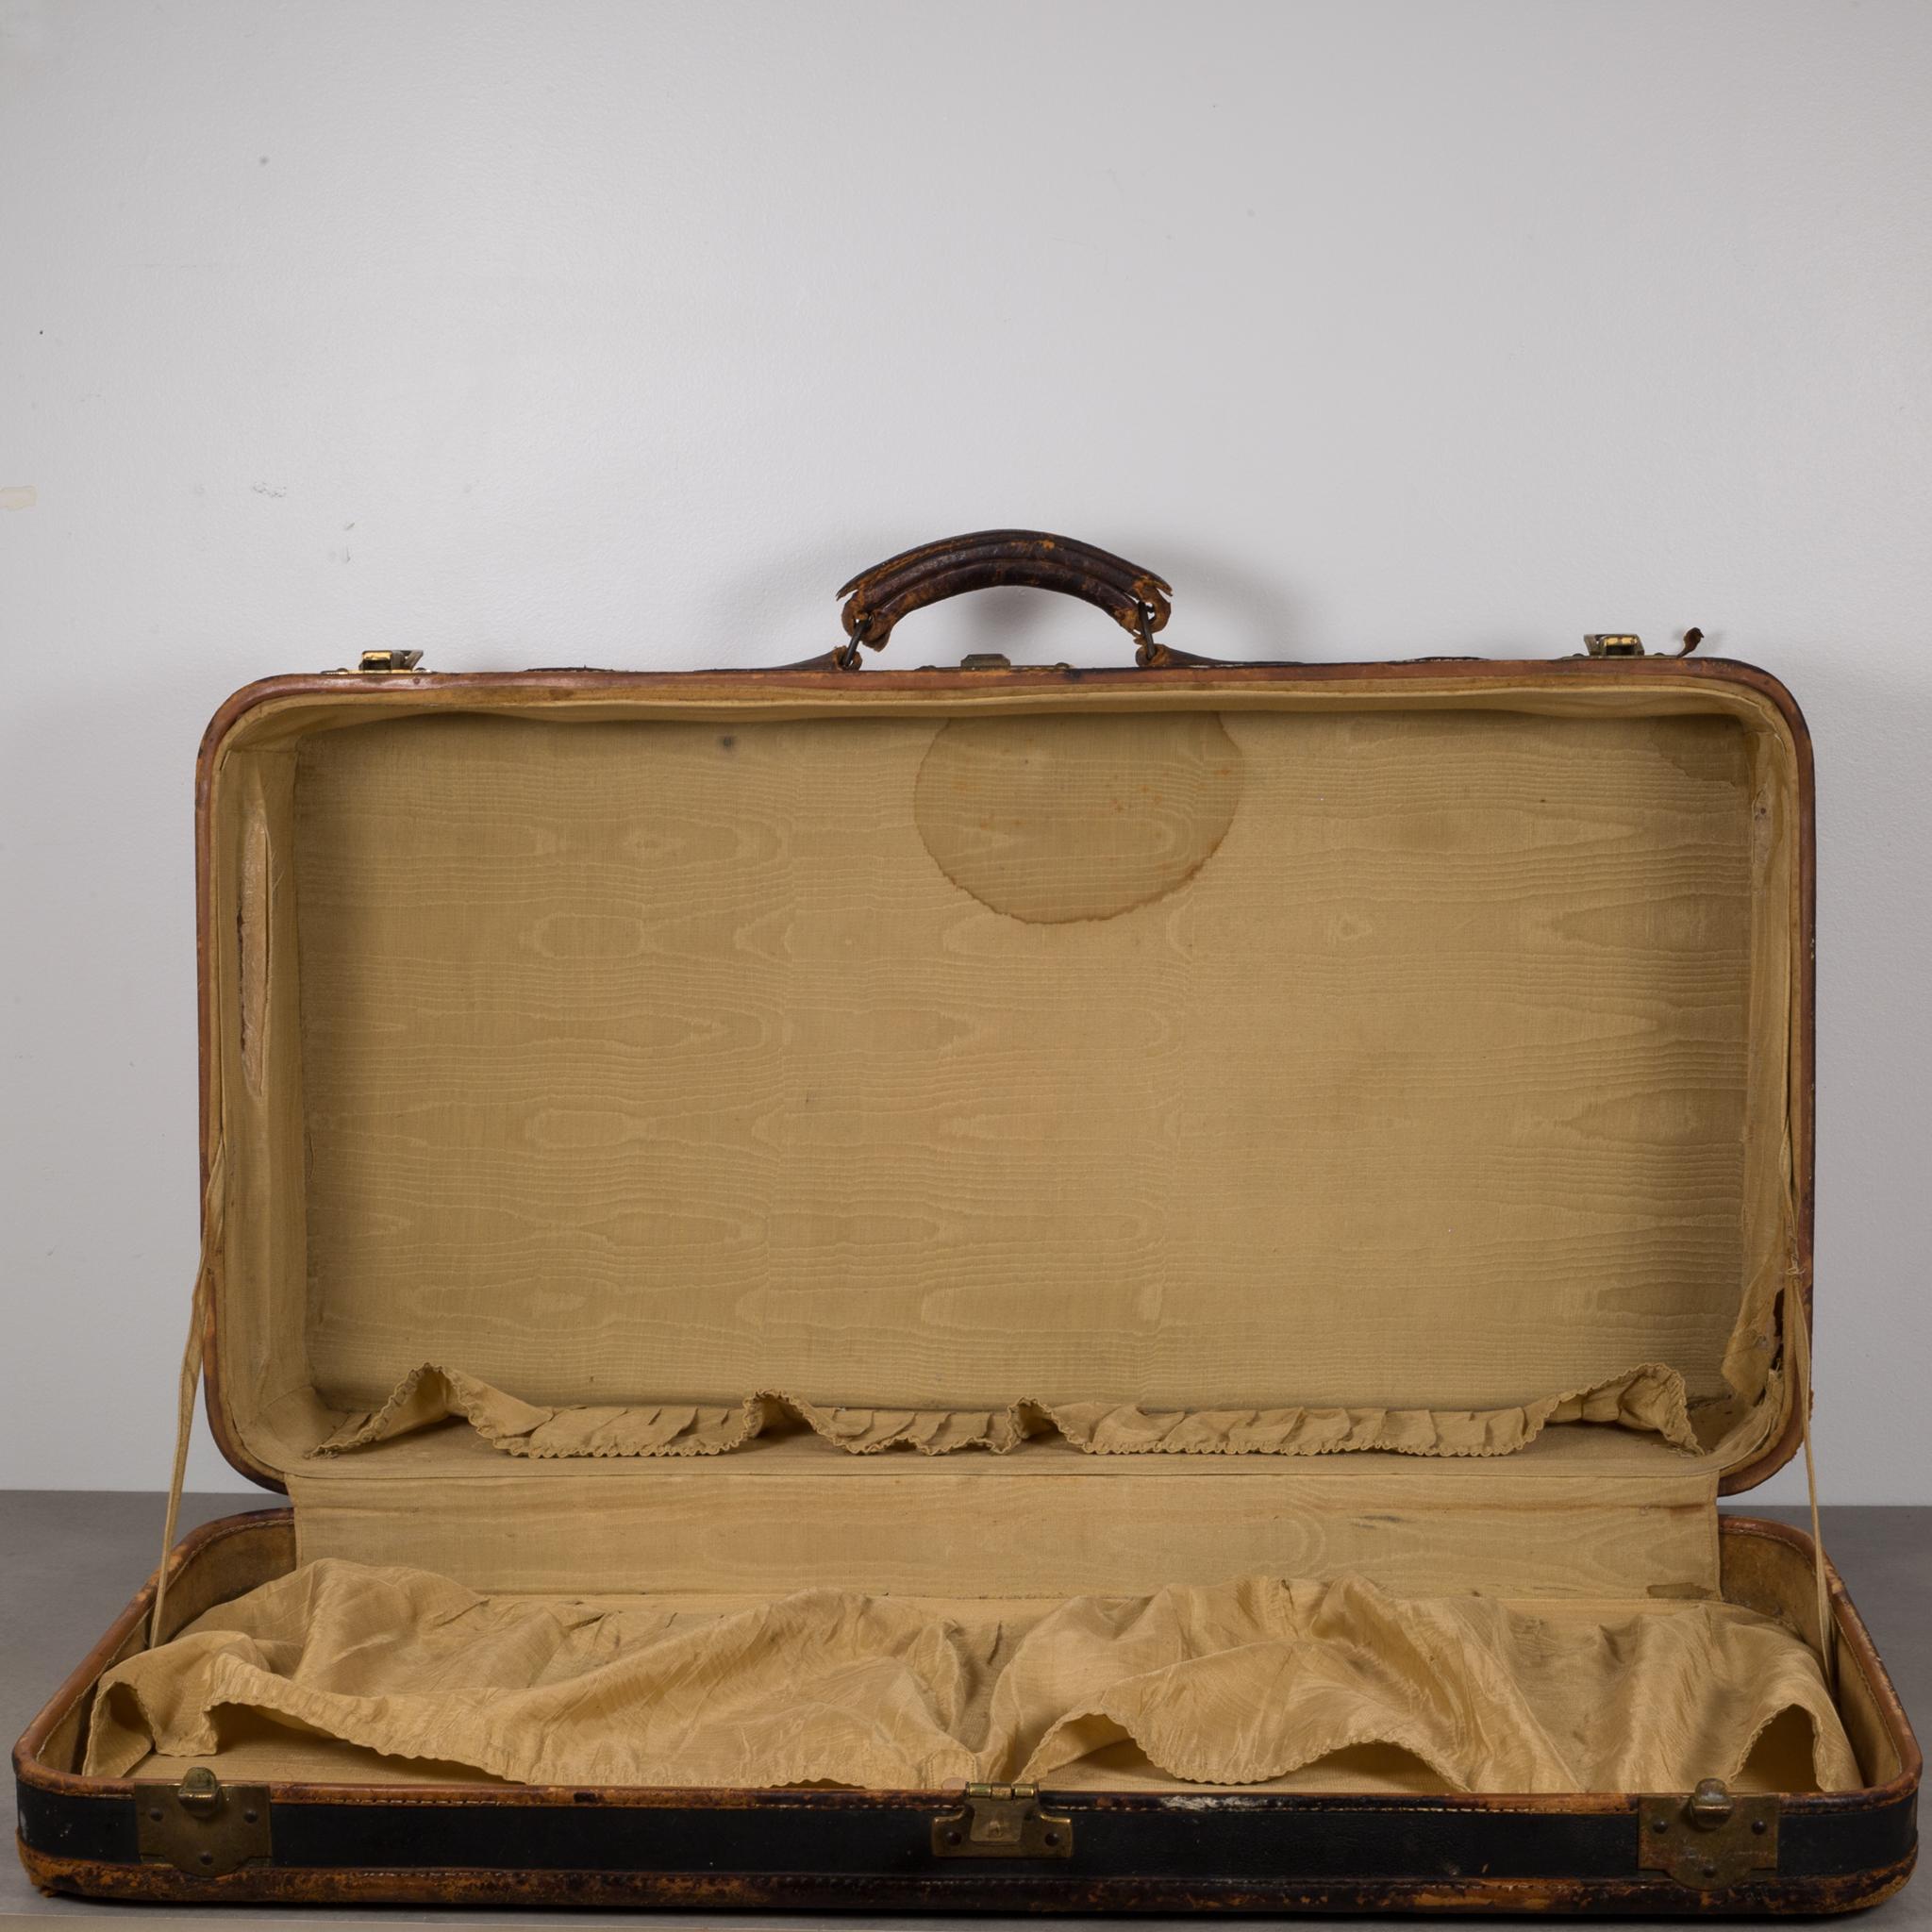 Unknown Antique Luggage with Original Travel Stickers, circa 1900-1930